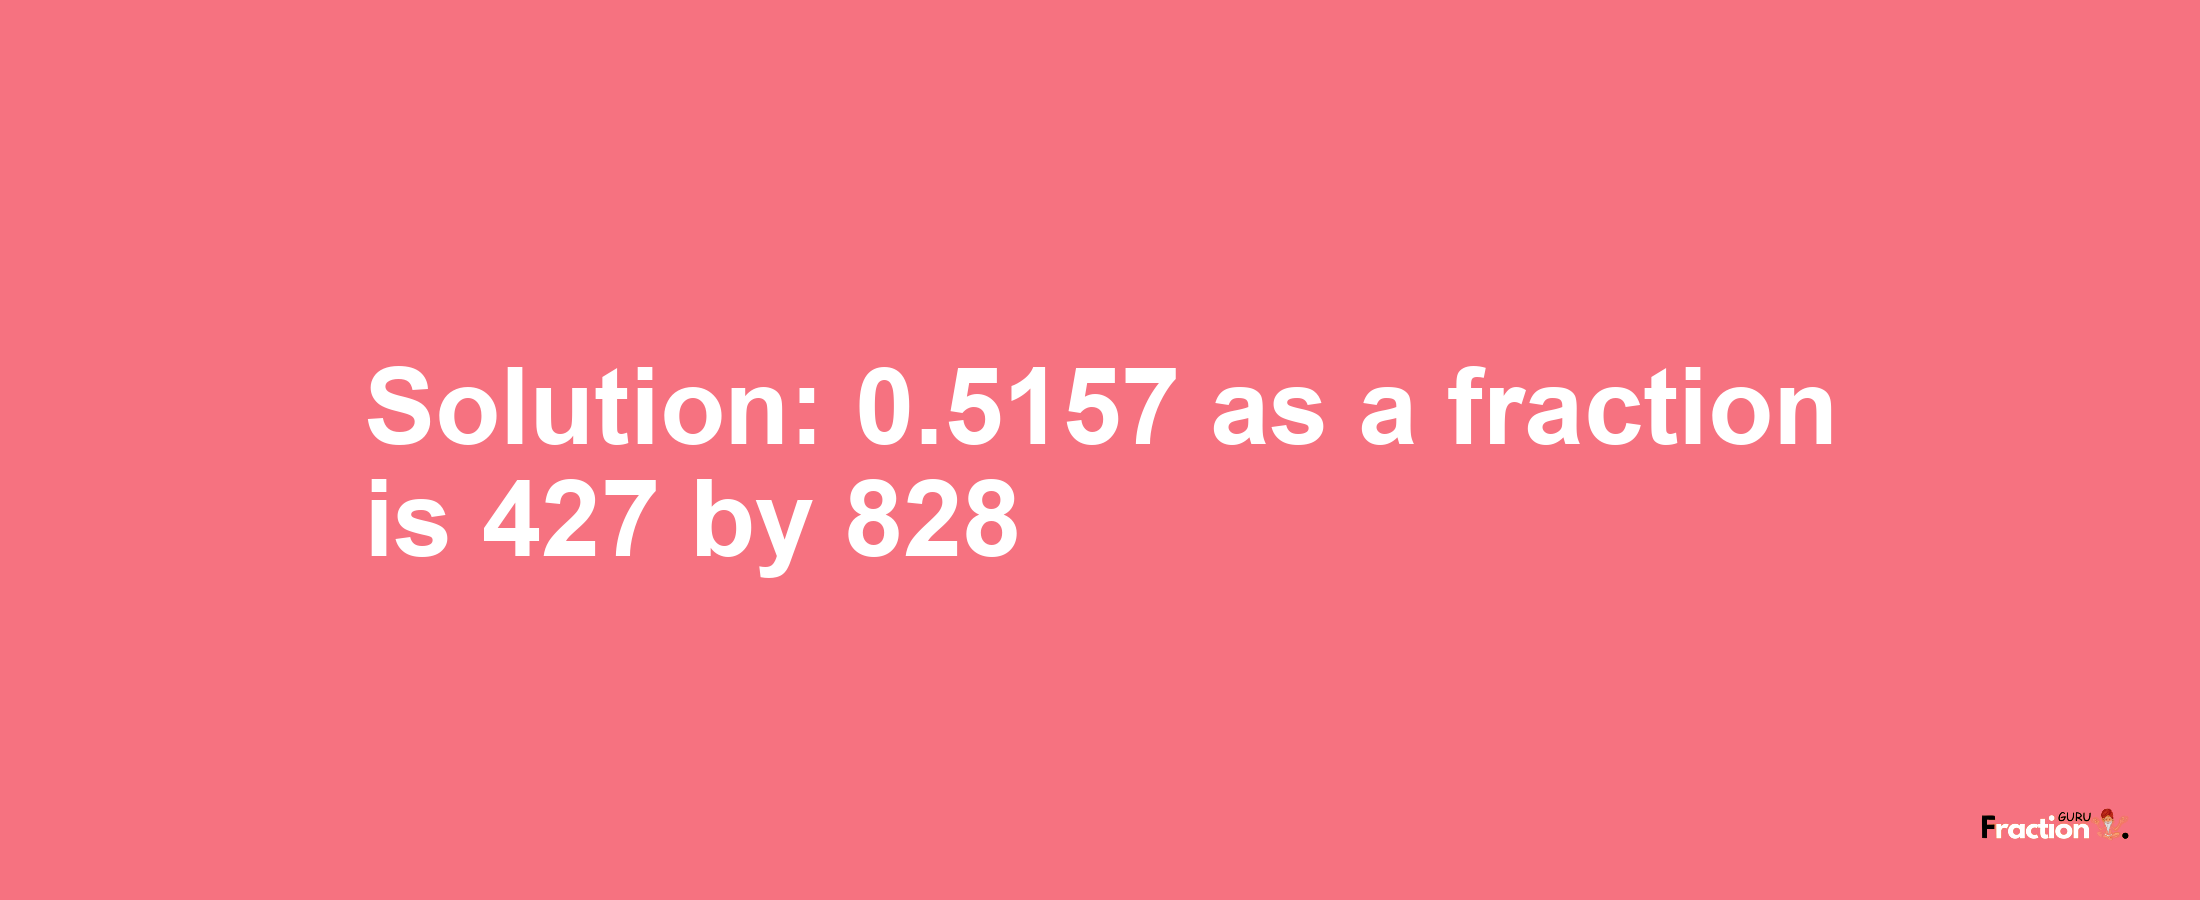 Solution:0.5157 as a fraction is 427/828